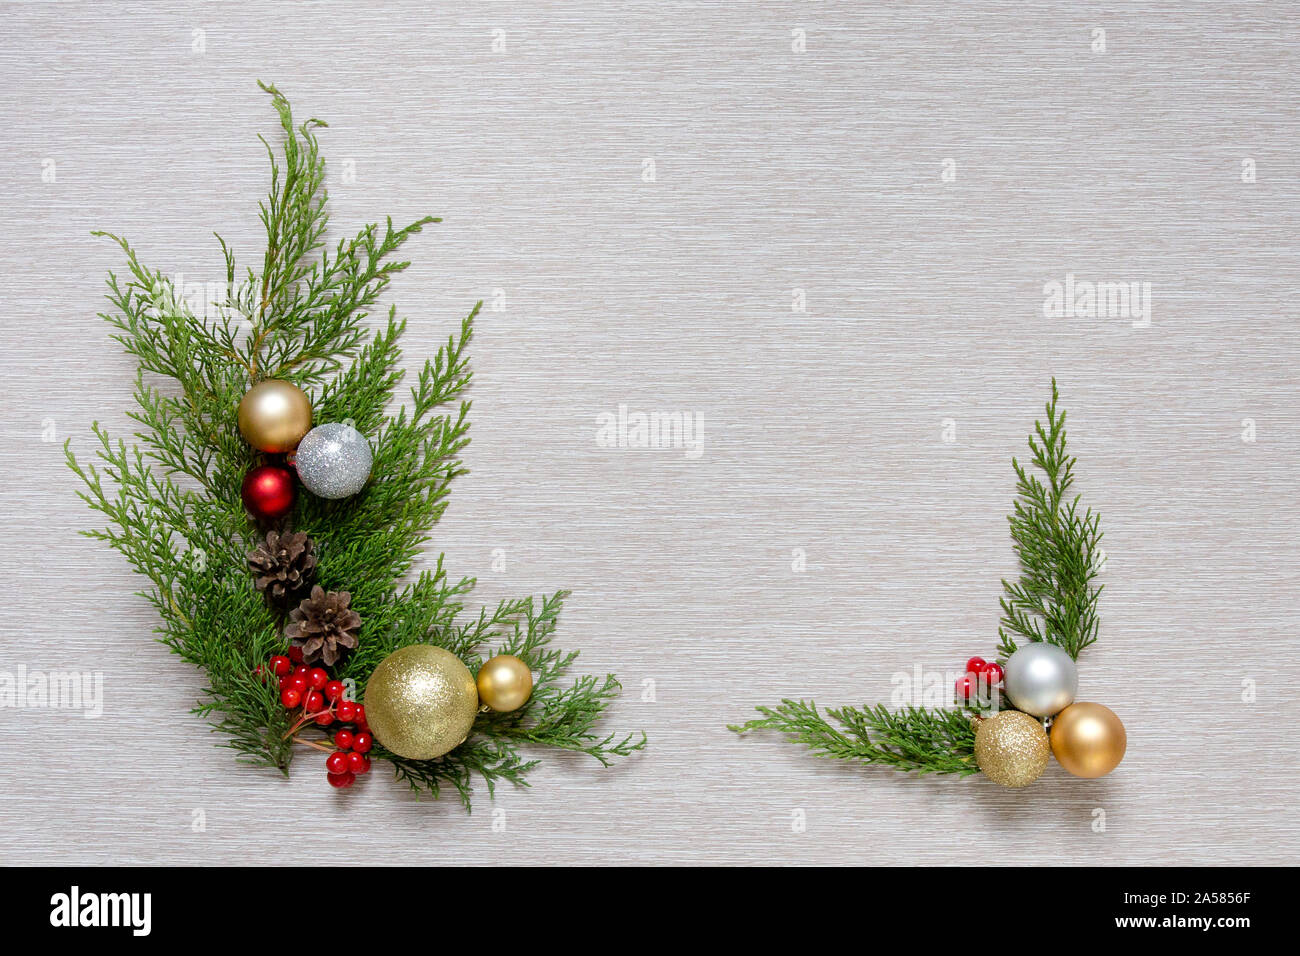 Christmas wooden background with fir branches and balls. New Year's decoration. Stock Photo